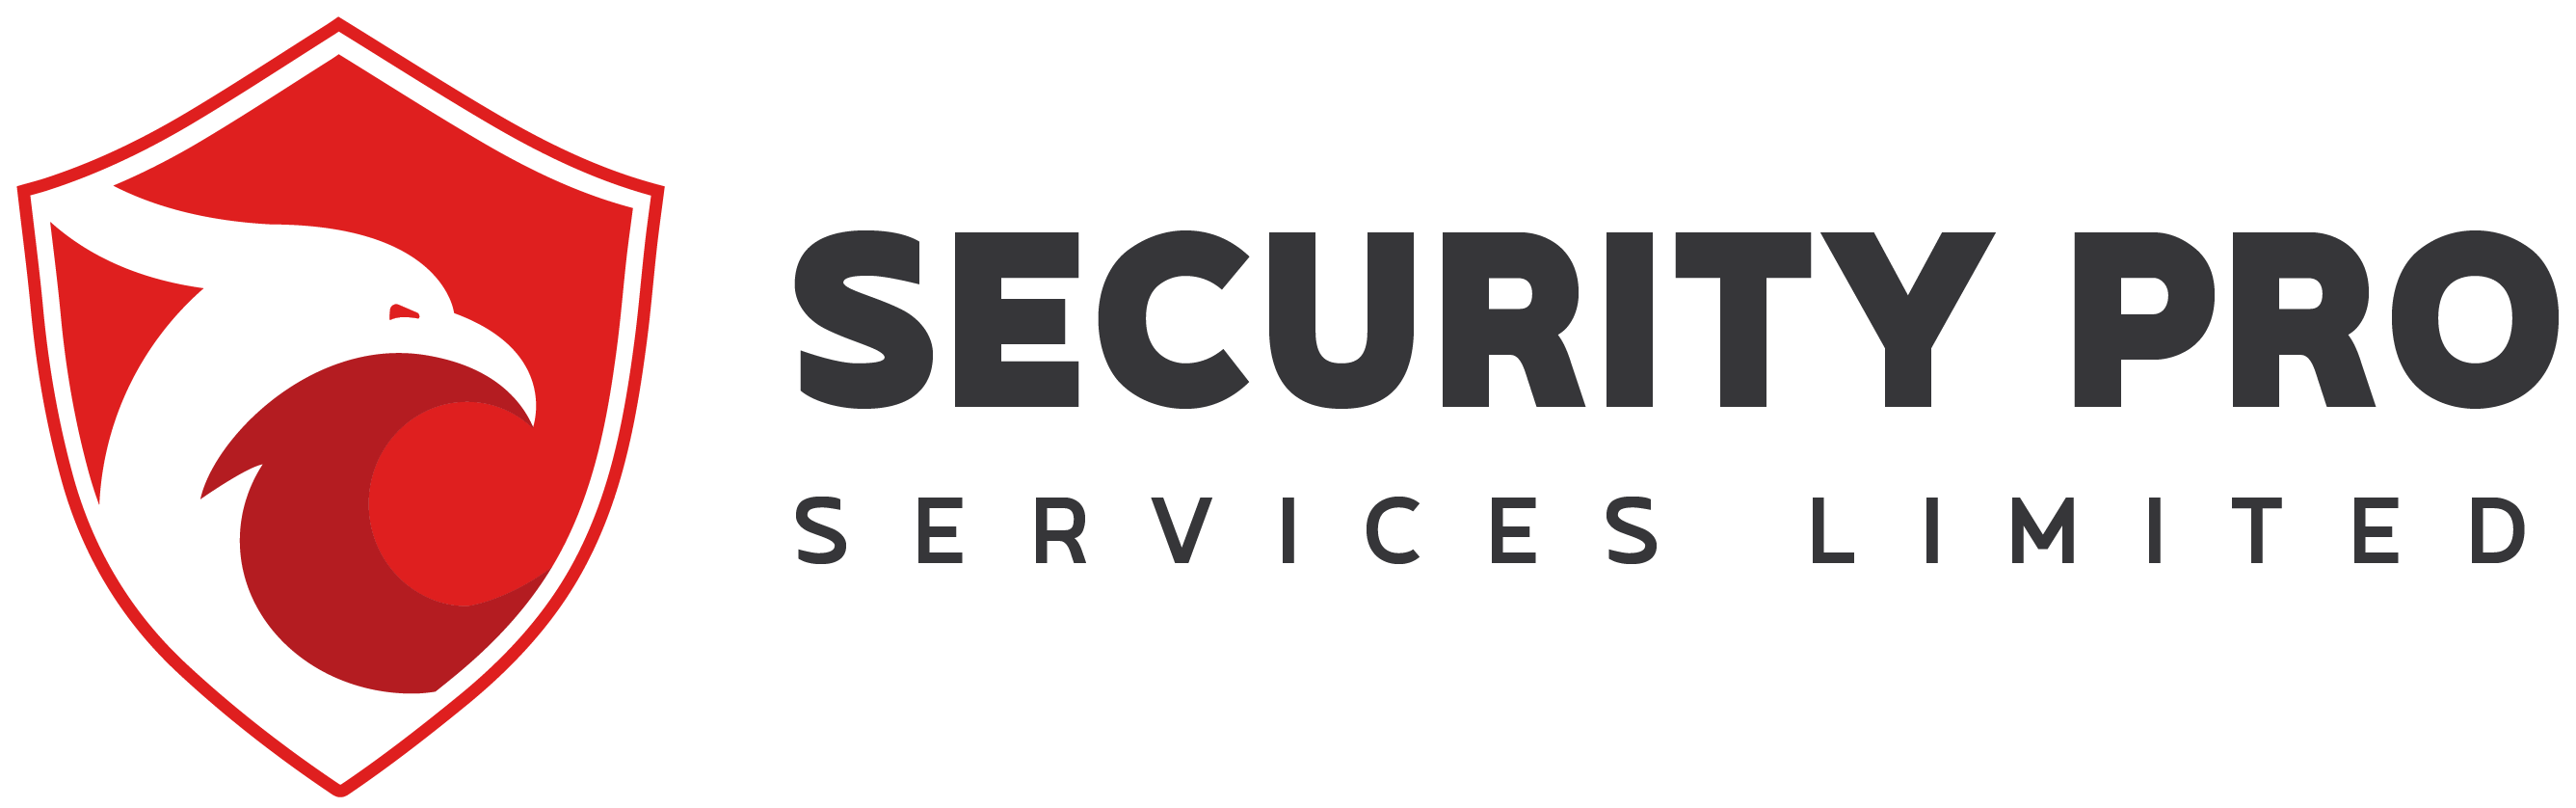 Security Pro Services Limited